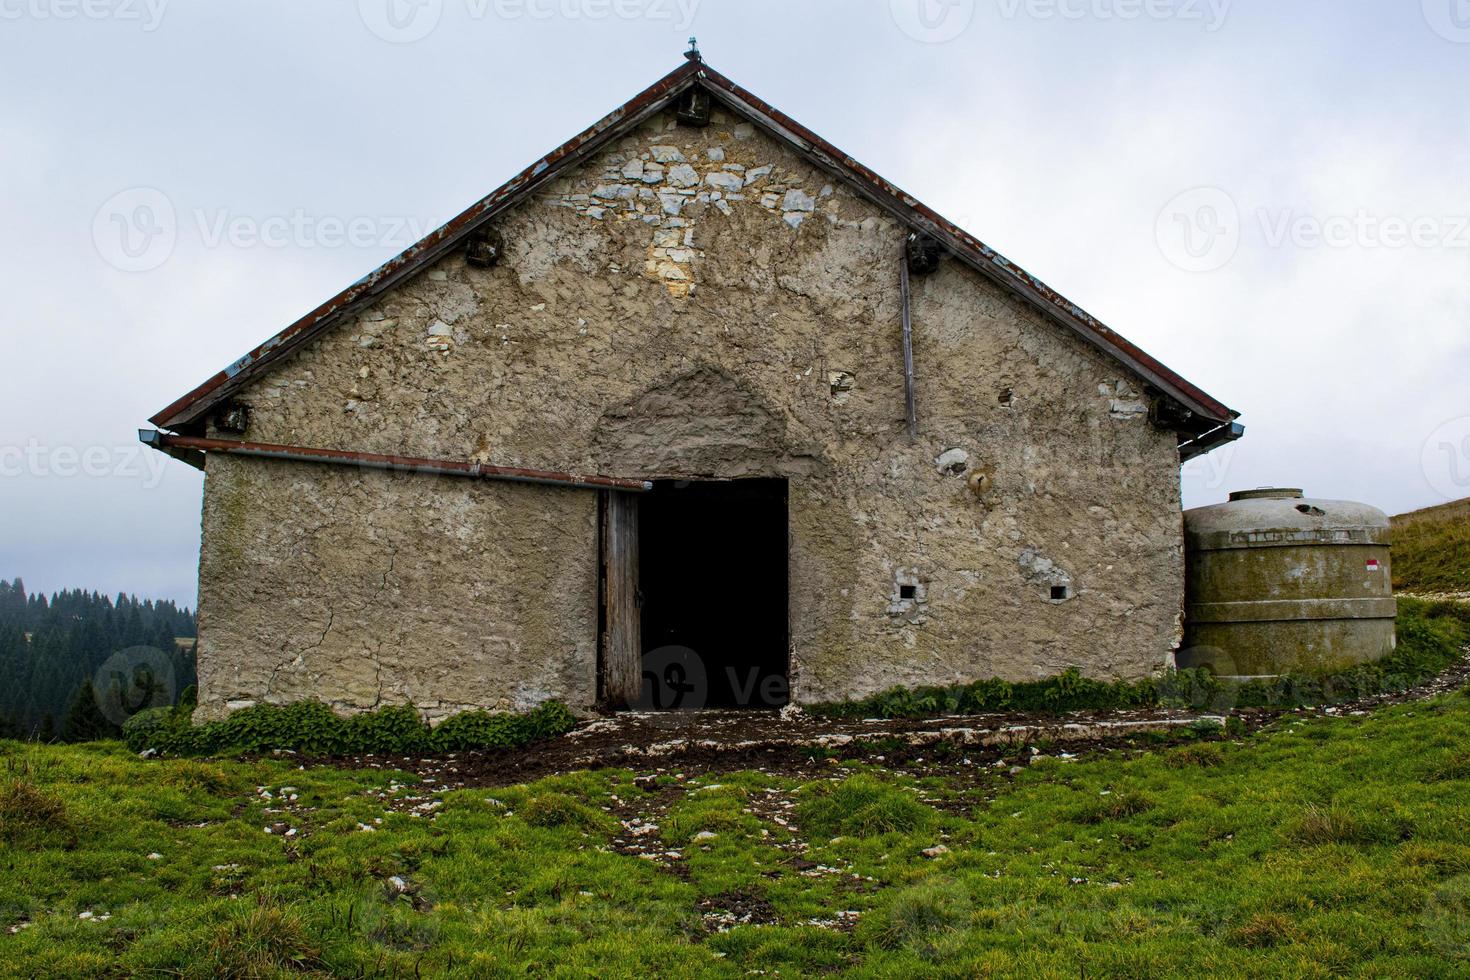 Stable in the mountains near the Melette on the Asiago plateau near Vicenza, Italy photo